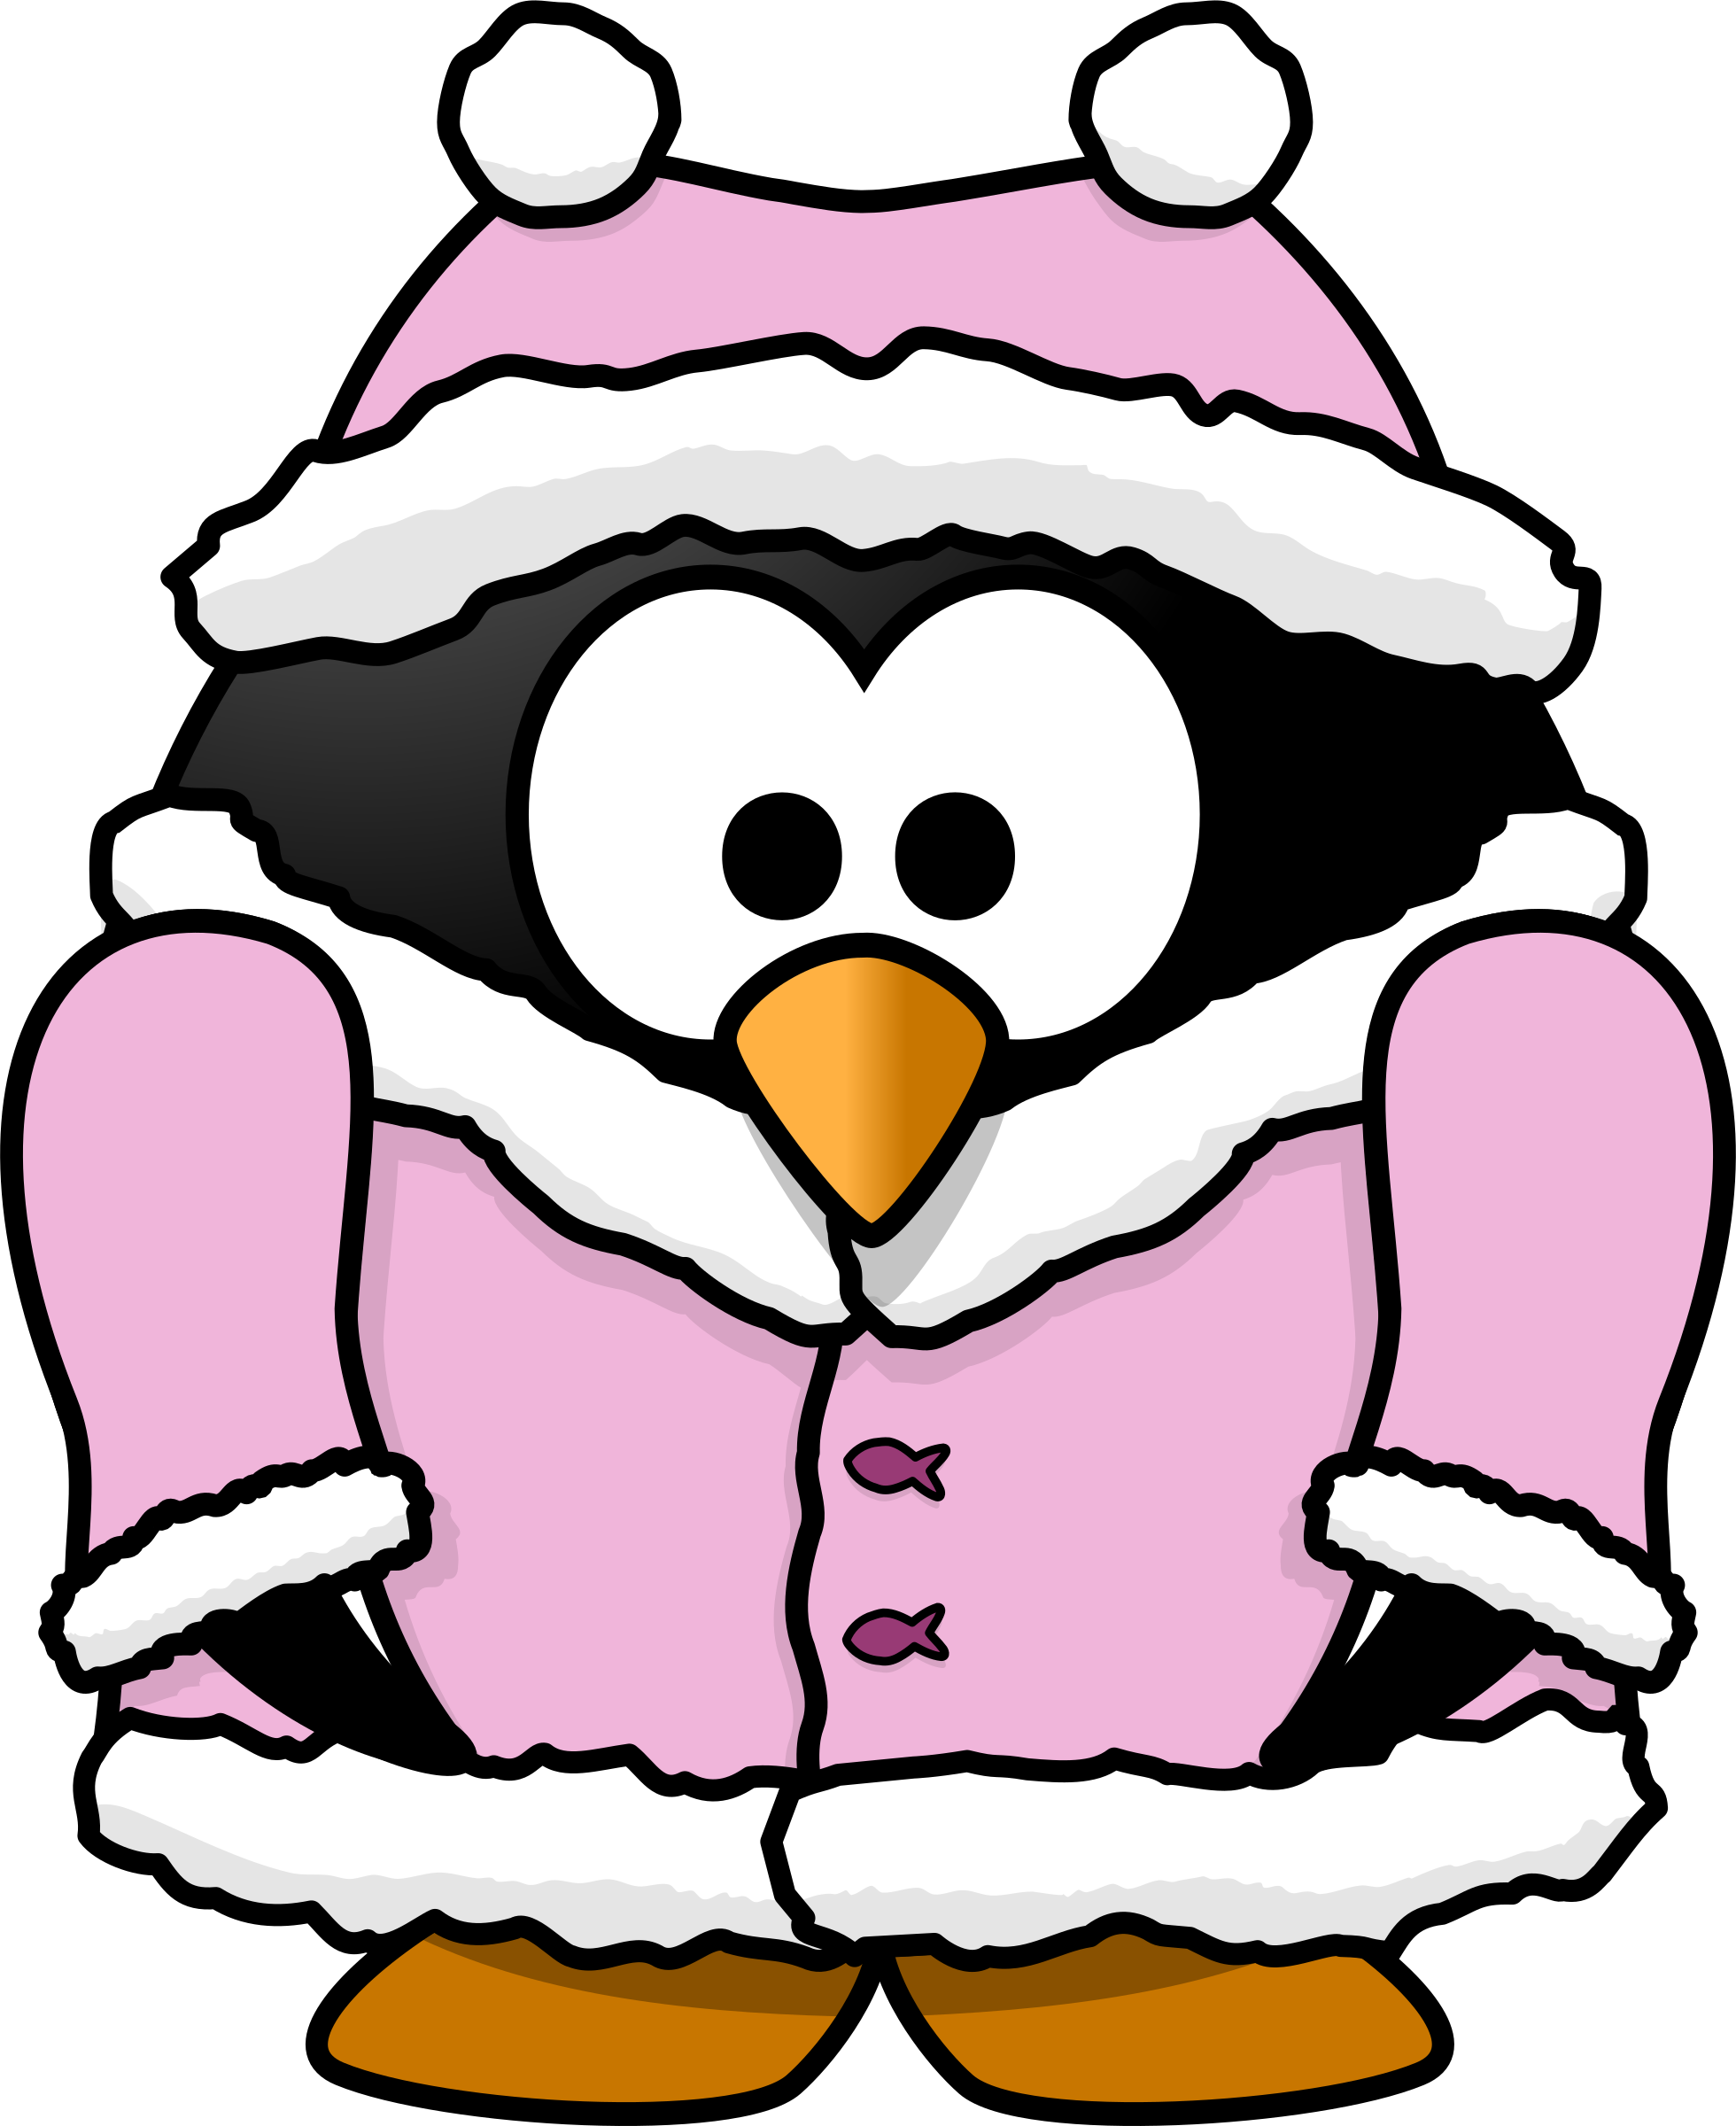 Penguin chick big image. Cold clipart cold animal